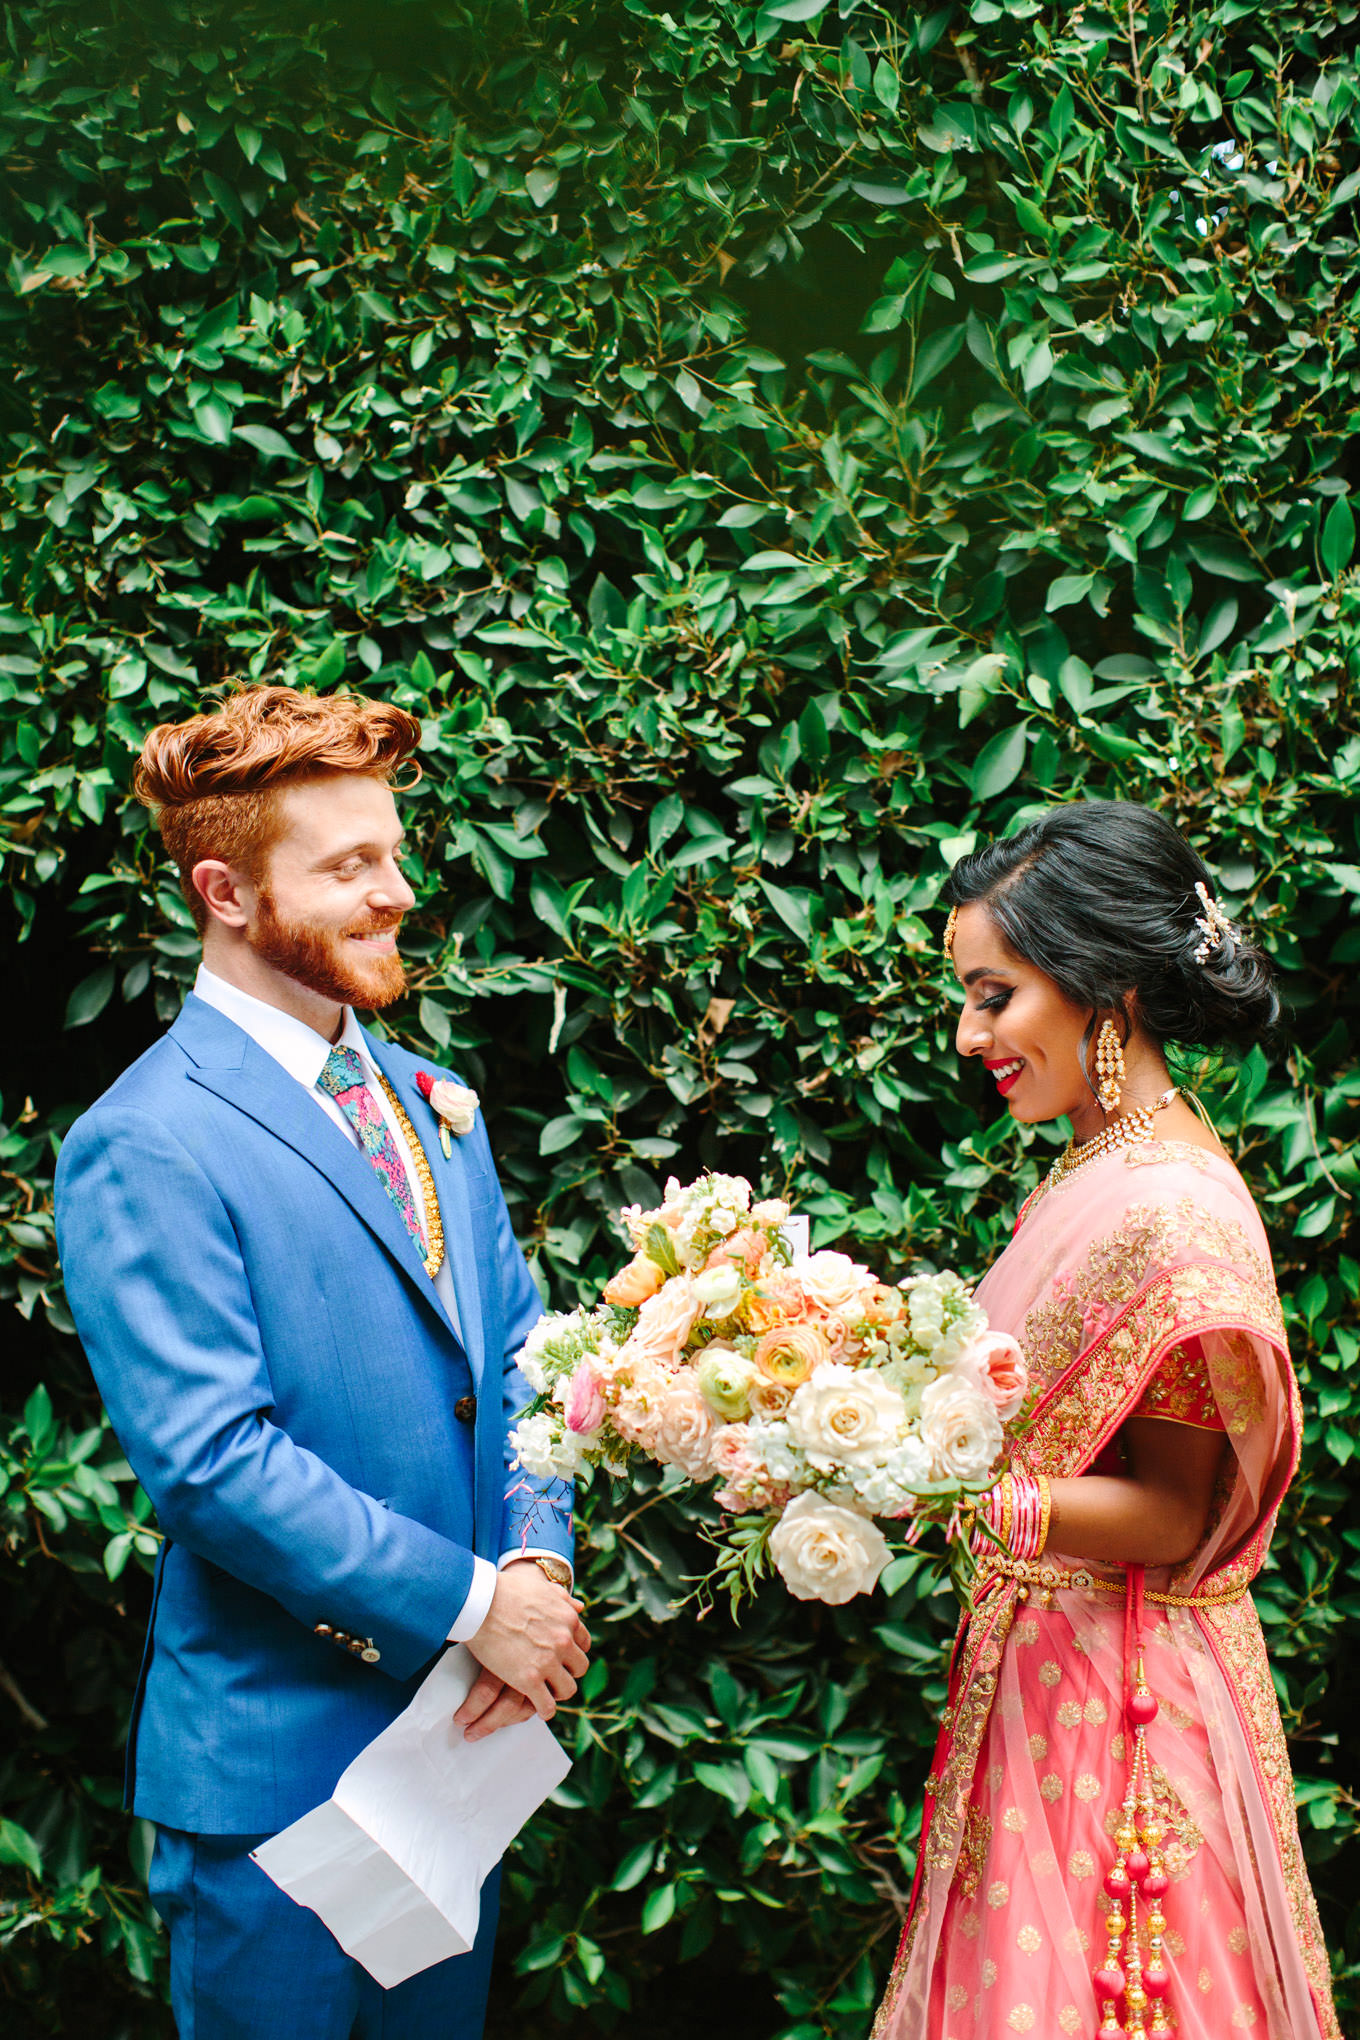 Bride and groom exchange vows privately before public ceremony. Two Disney artists create a unique and colorful Indian Fusion wedding at The Fig House Los Angeles, featured on Green Wedding Shoes. | Colorful and elevated wedding inspiration for fun-loving couples in Southern California | #indianwedding #indianfusionwedding #thefighouse #losangeleswedding   Source: Mary Costa Photography | Los Angeles